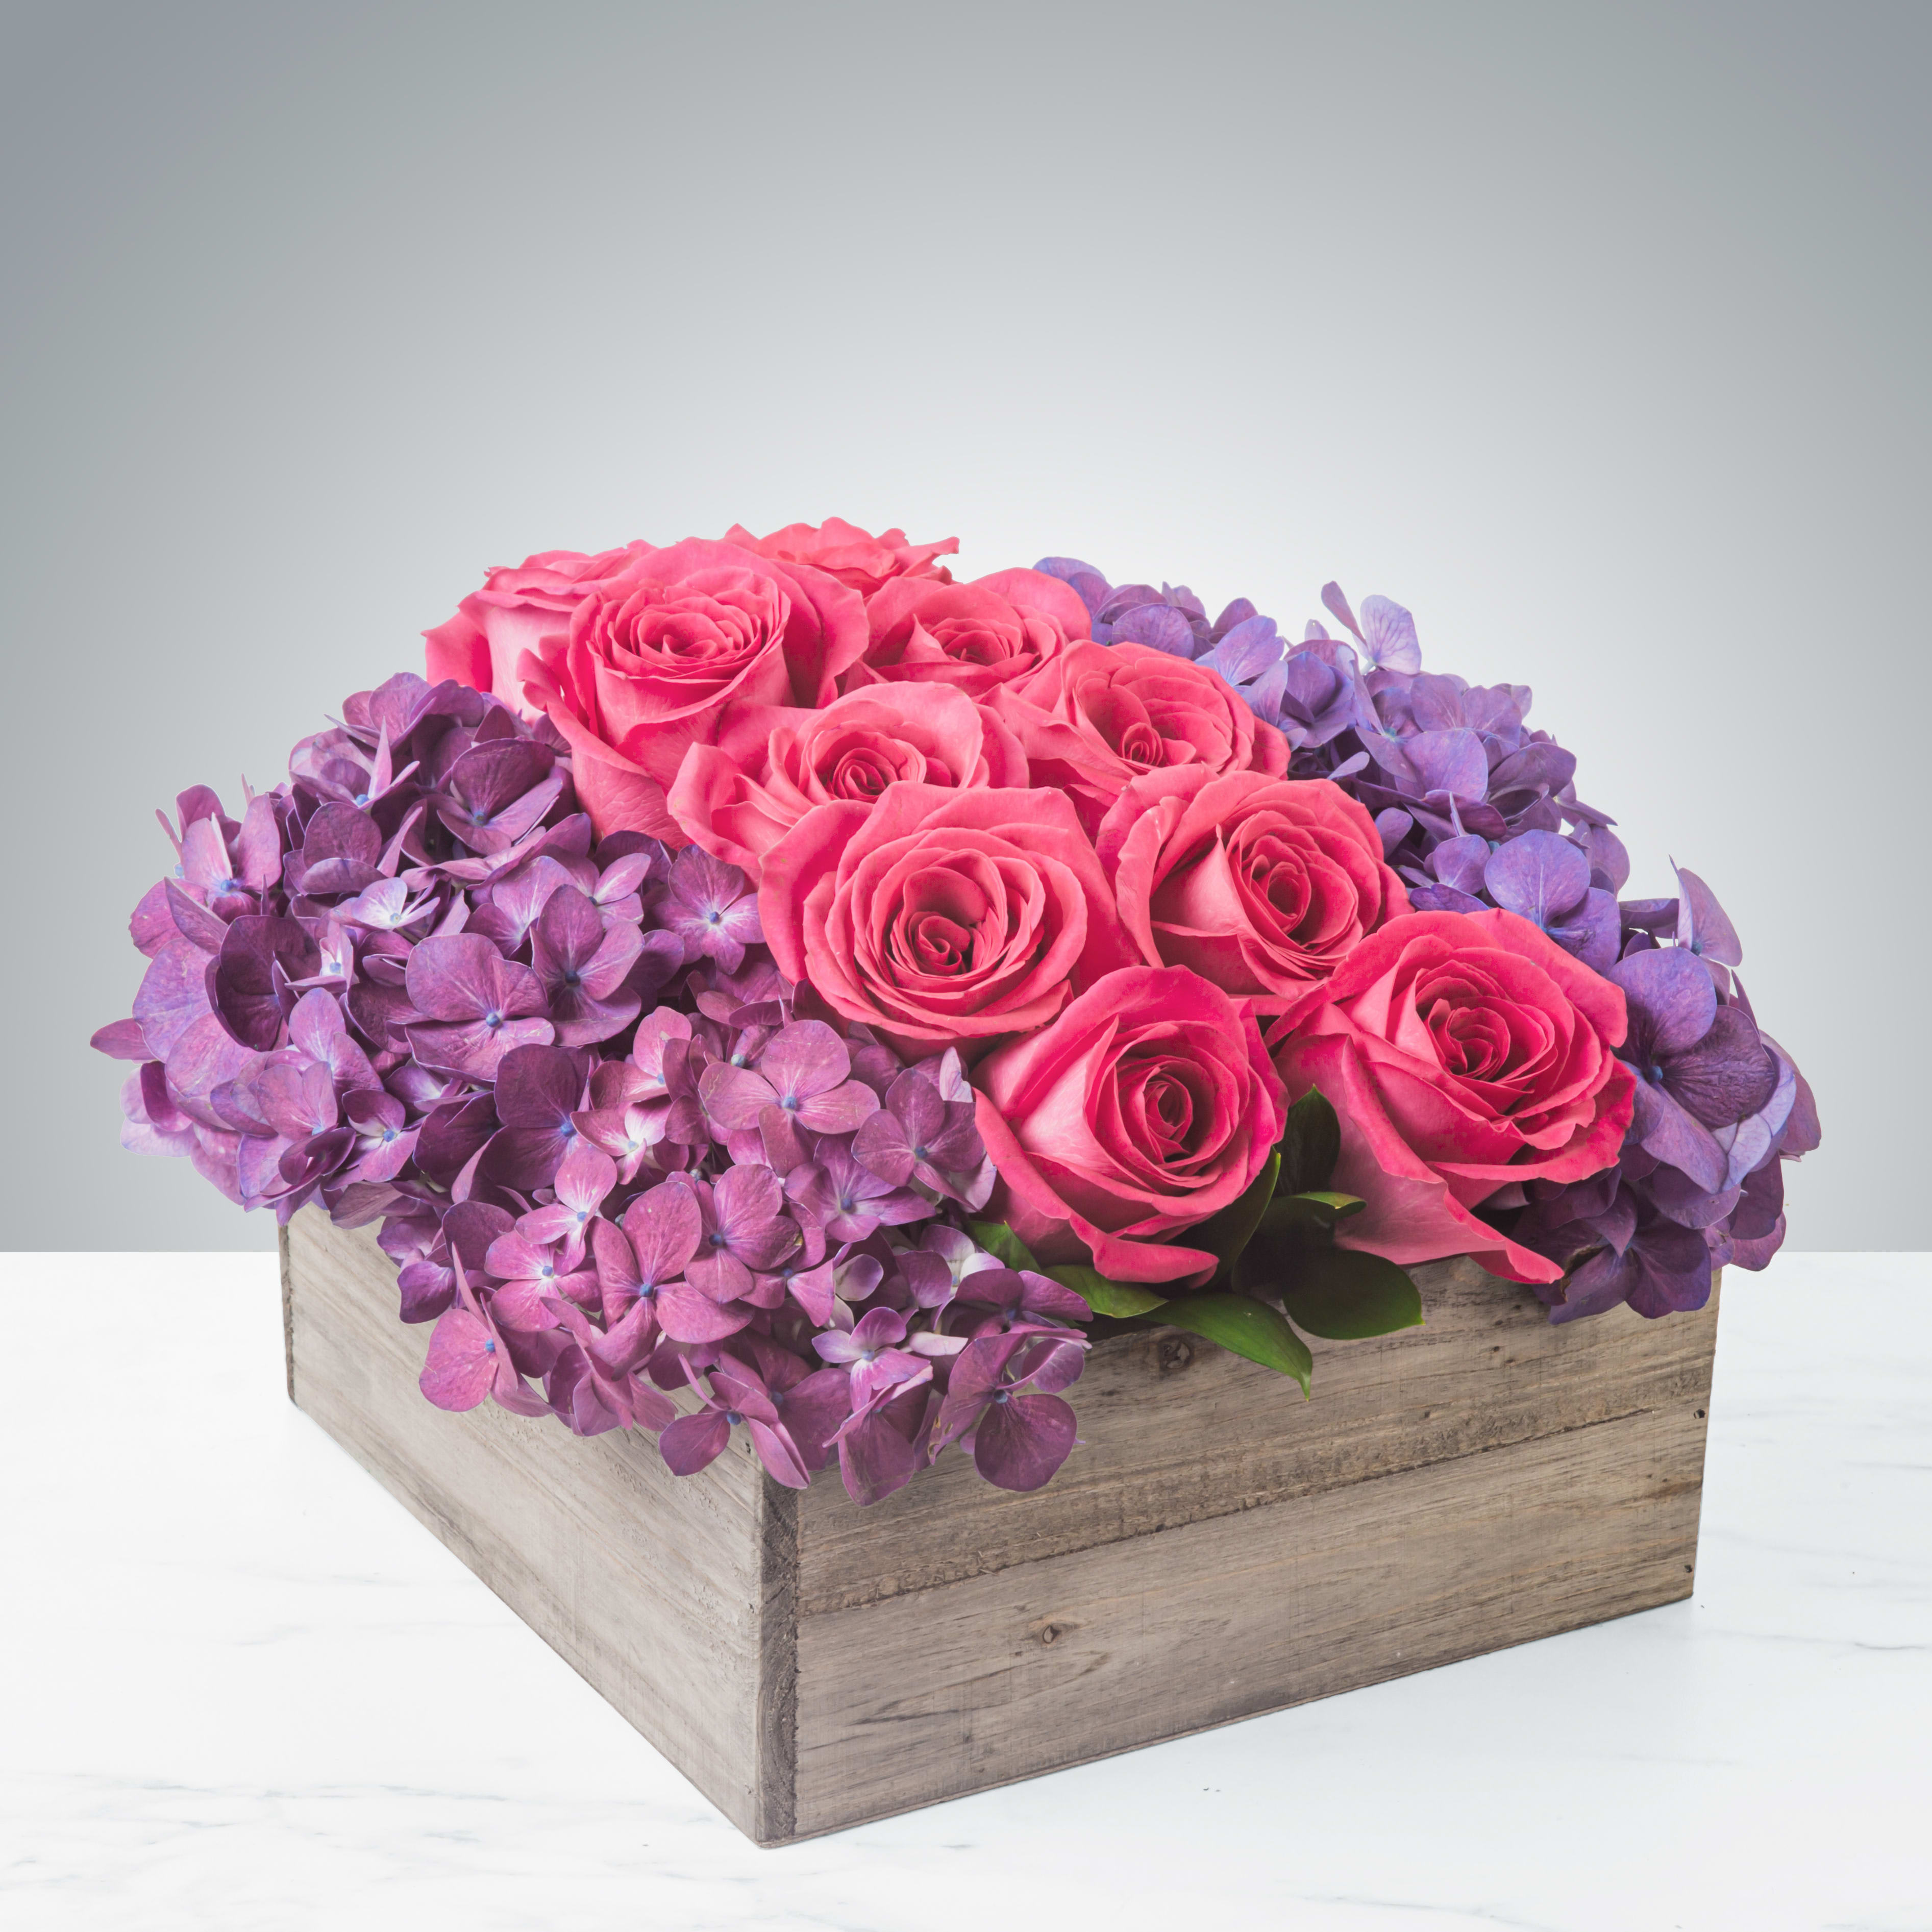 Modern Class by BloomNation™ - This large flower box is a full statement and brings color to any room. Featuring roses, hydrangeas and violets, the lines of the arrangement make it as chic as the vibrant colors make it dramatic.   APPROXIMATE DIMENSIONS 12&quot; W X 12&quot; L X 6&quot; H